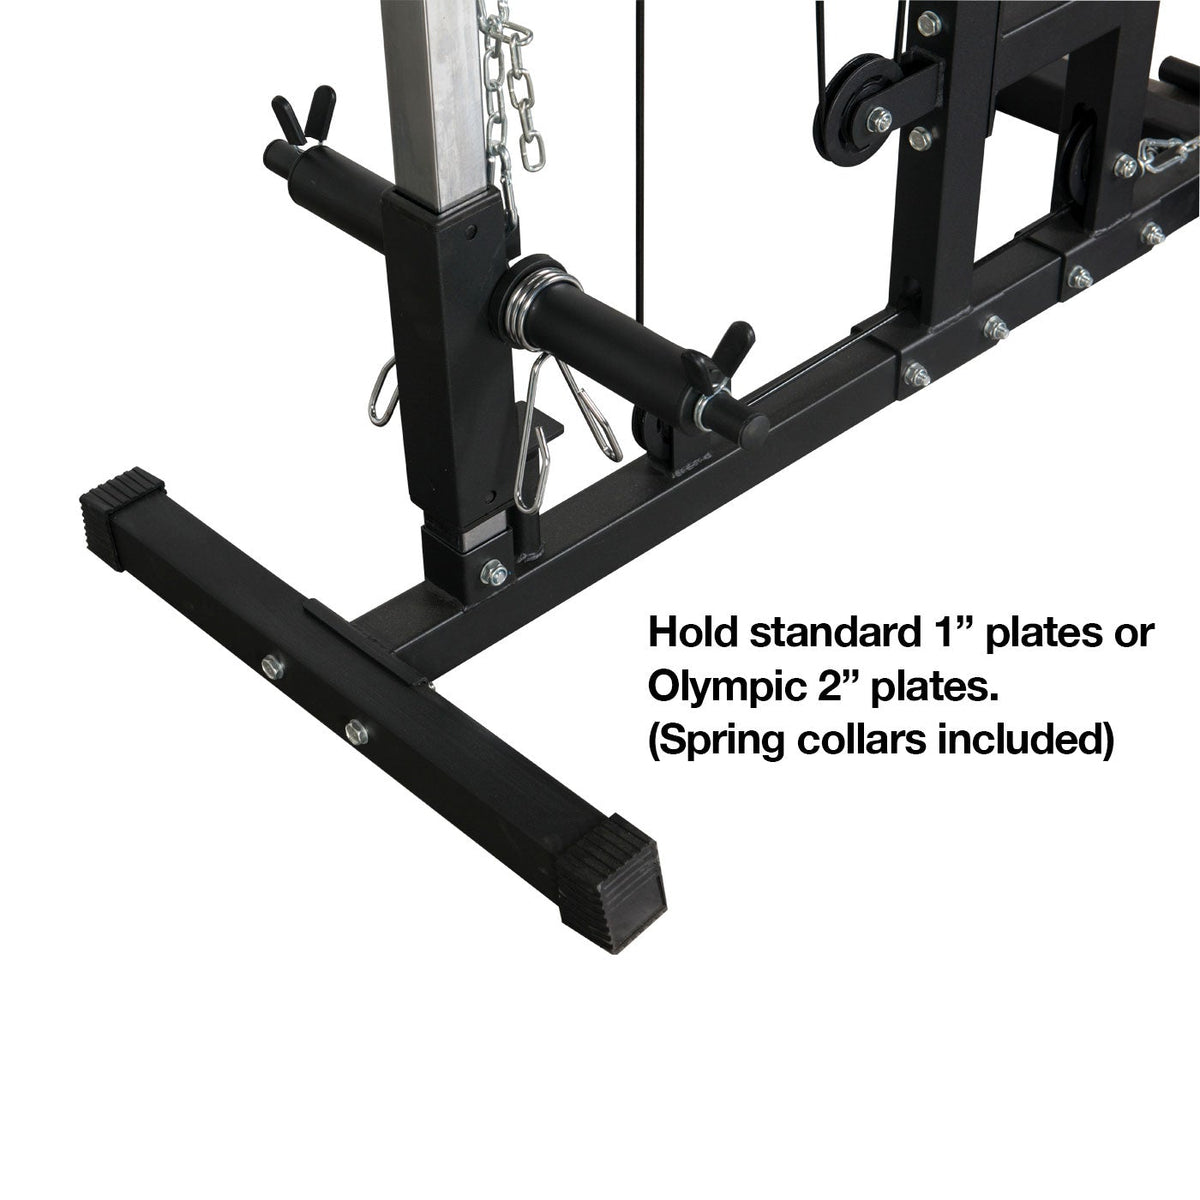 Straight Lat Pull Down Bar Attachment With Handles - 50cm